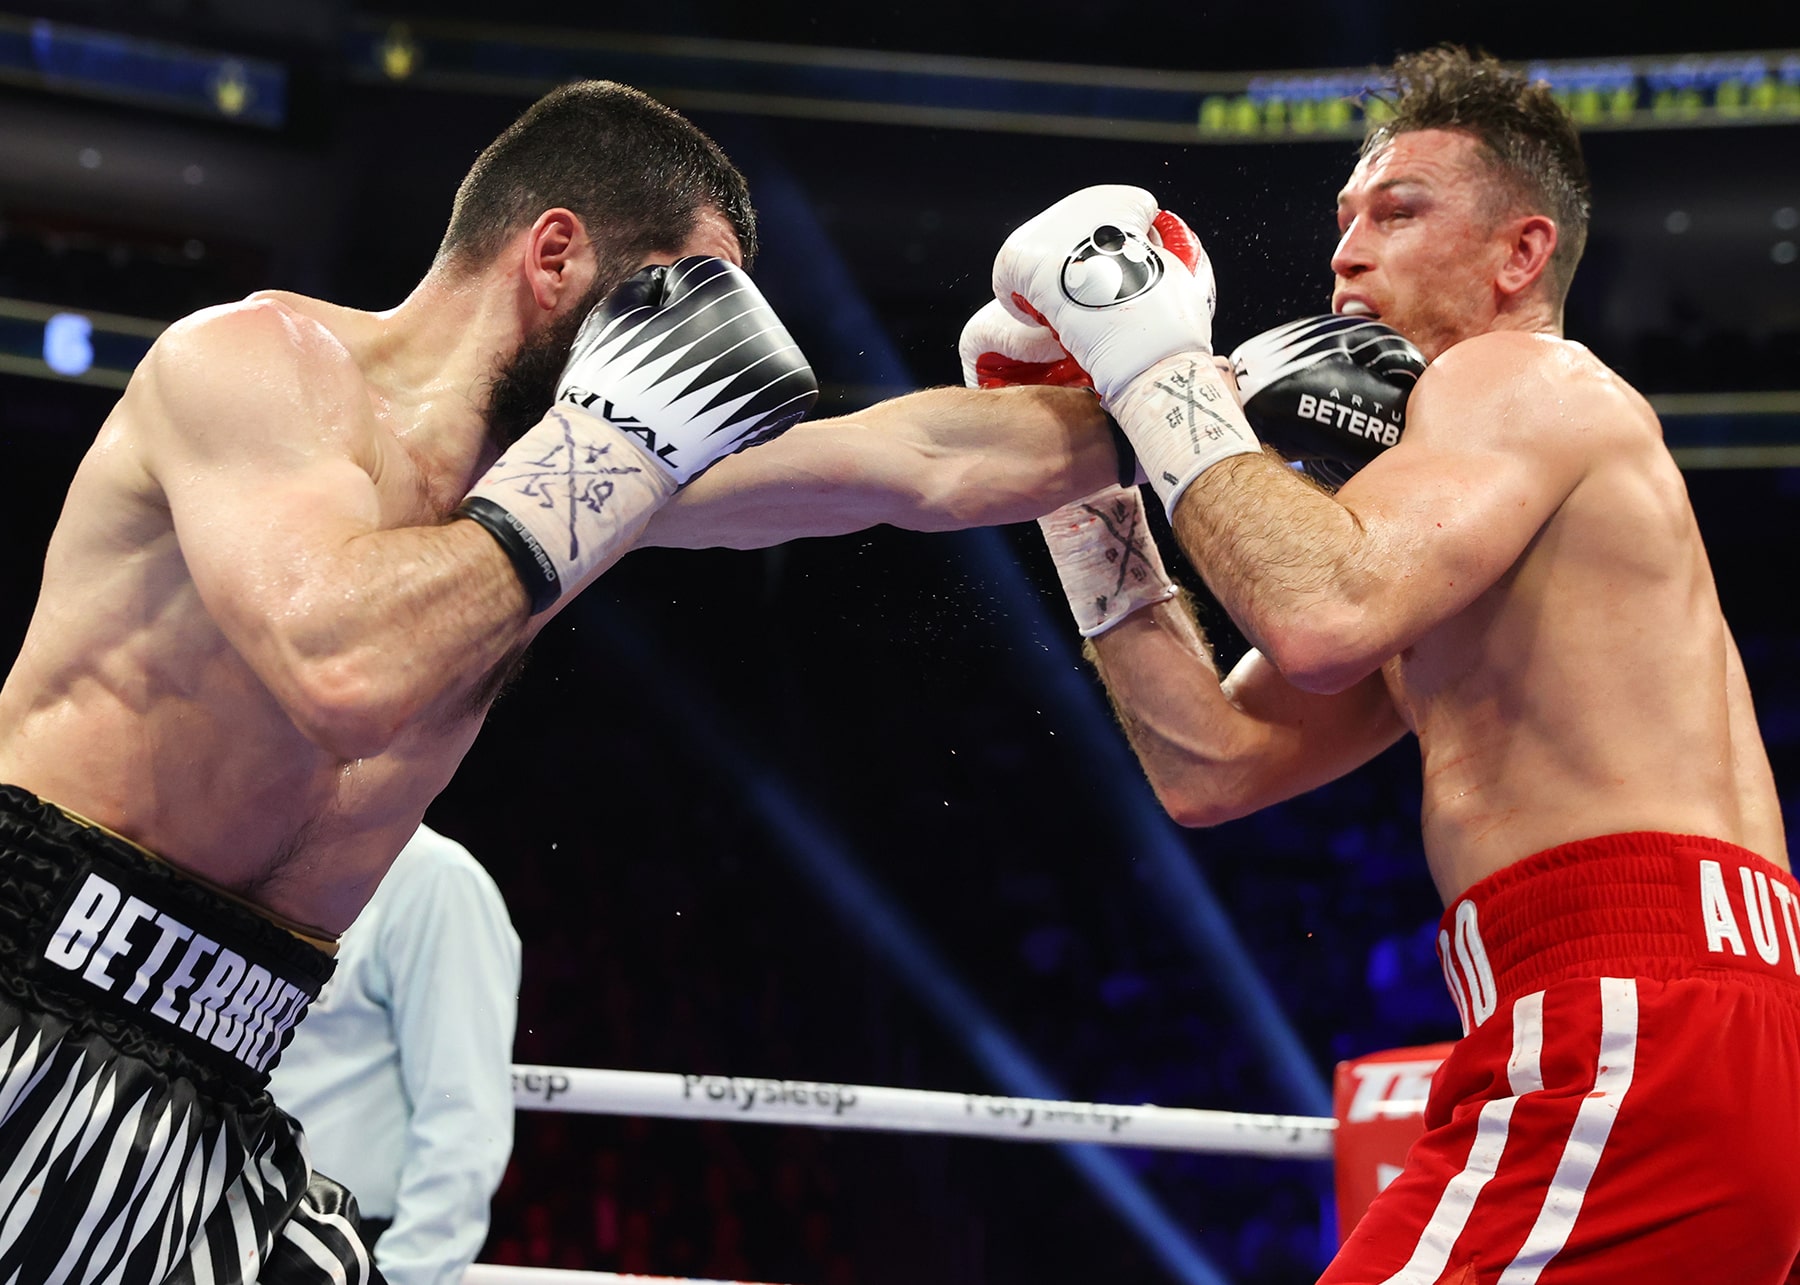 Chris Algieri's School of Thought: Beterbiev-Bivol is the fight the world needs but Buatsi could challenge them if he beats Azeez